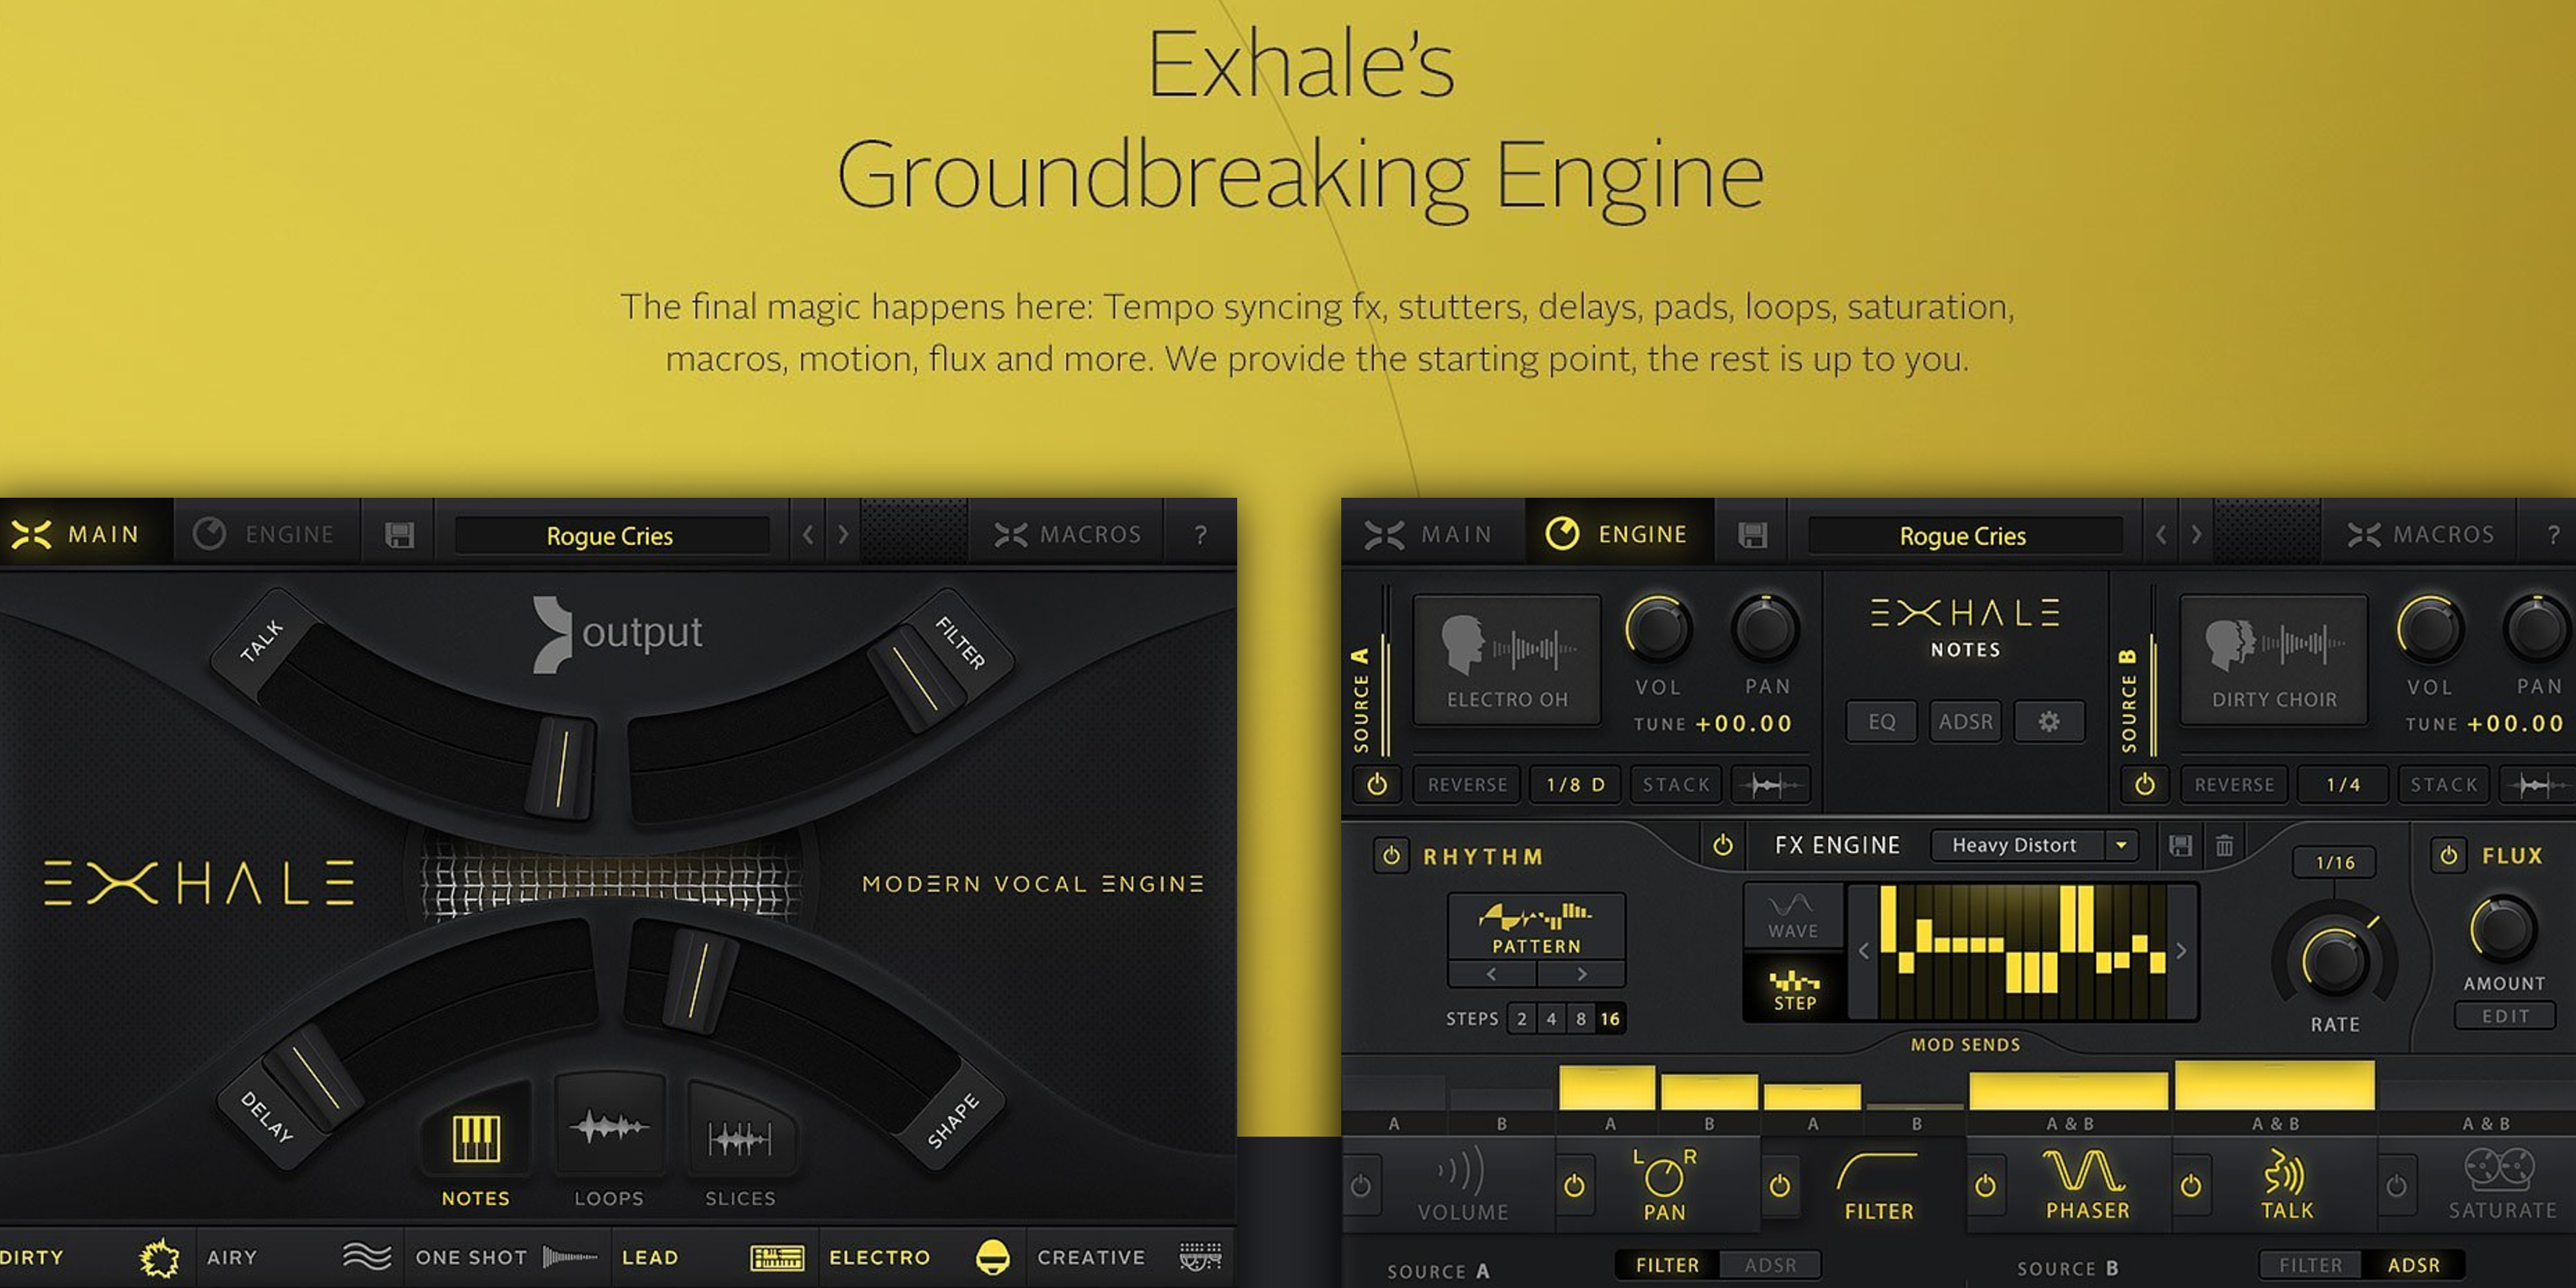 making music with exhale by output fl studio 12